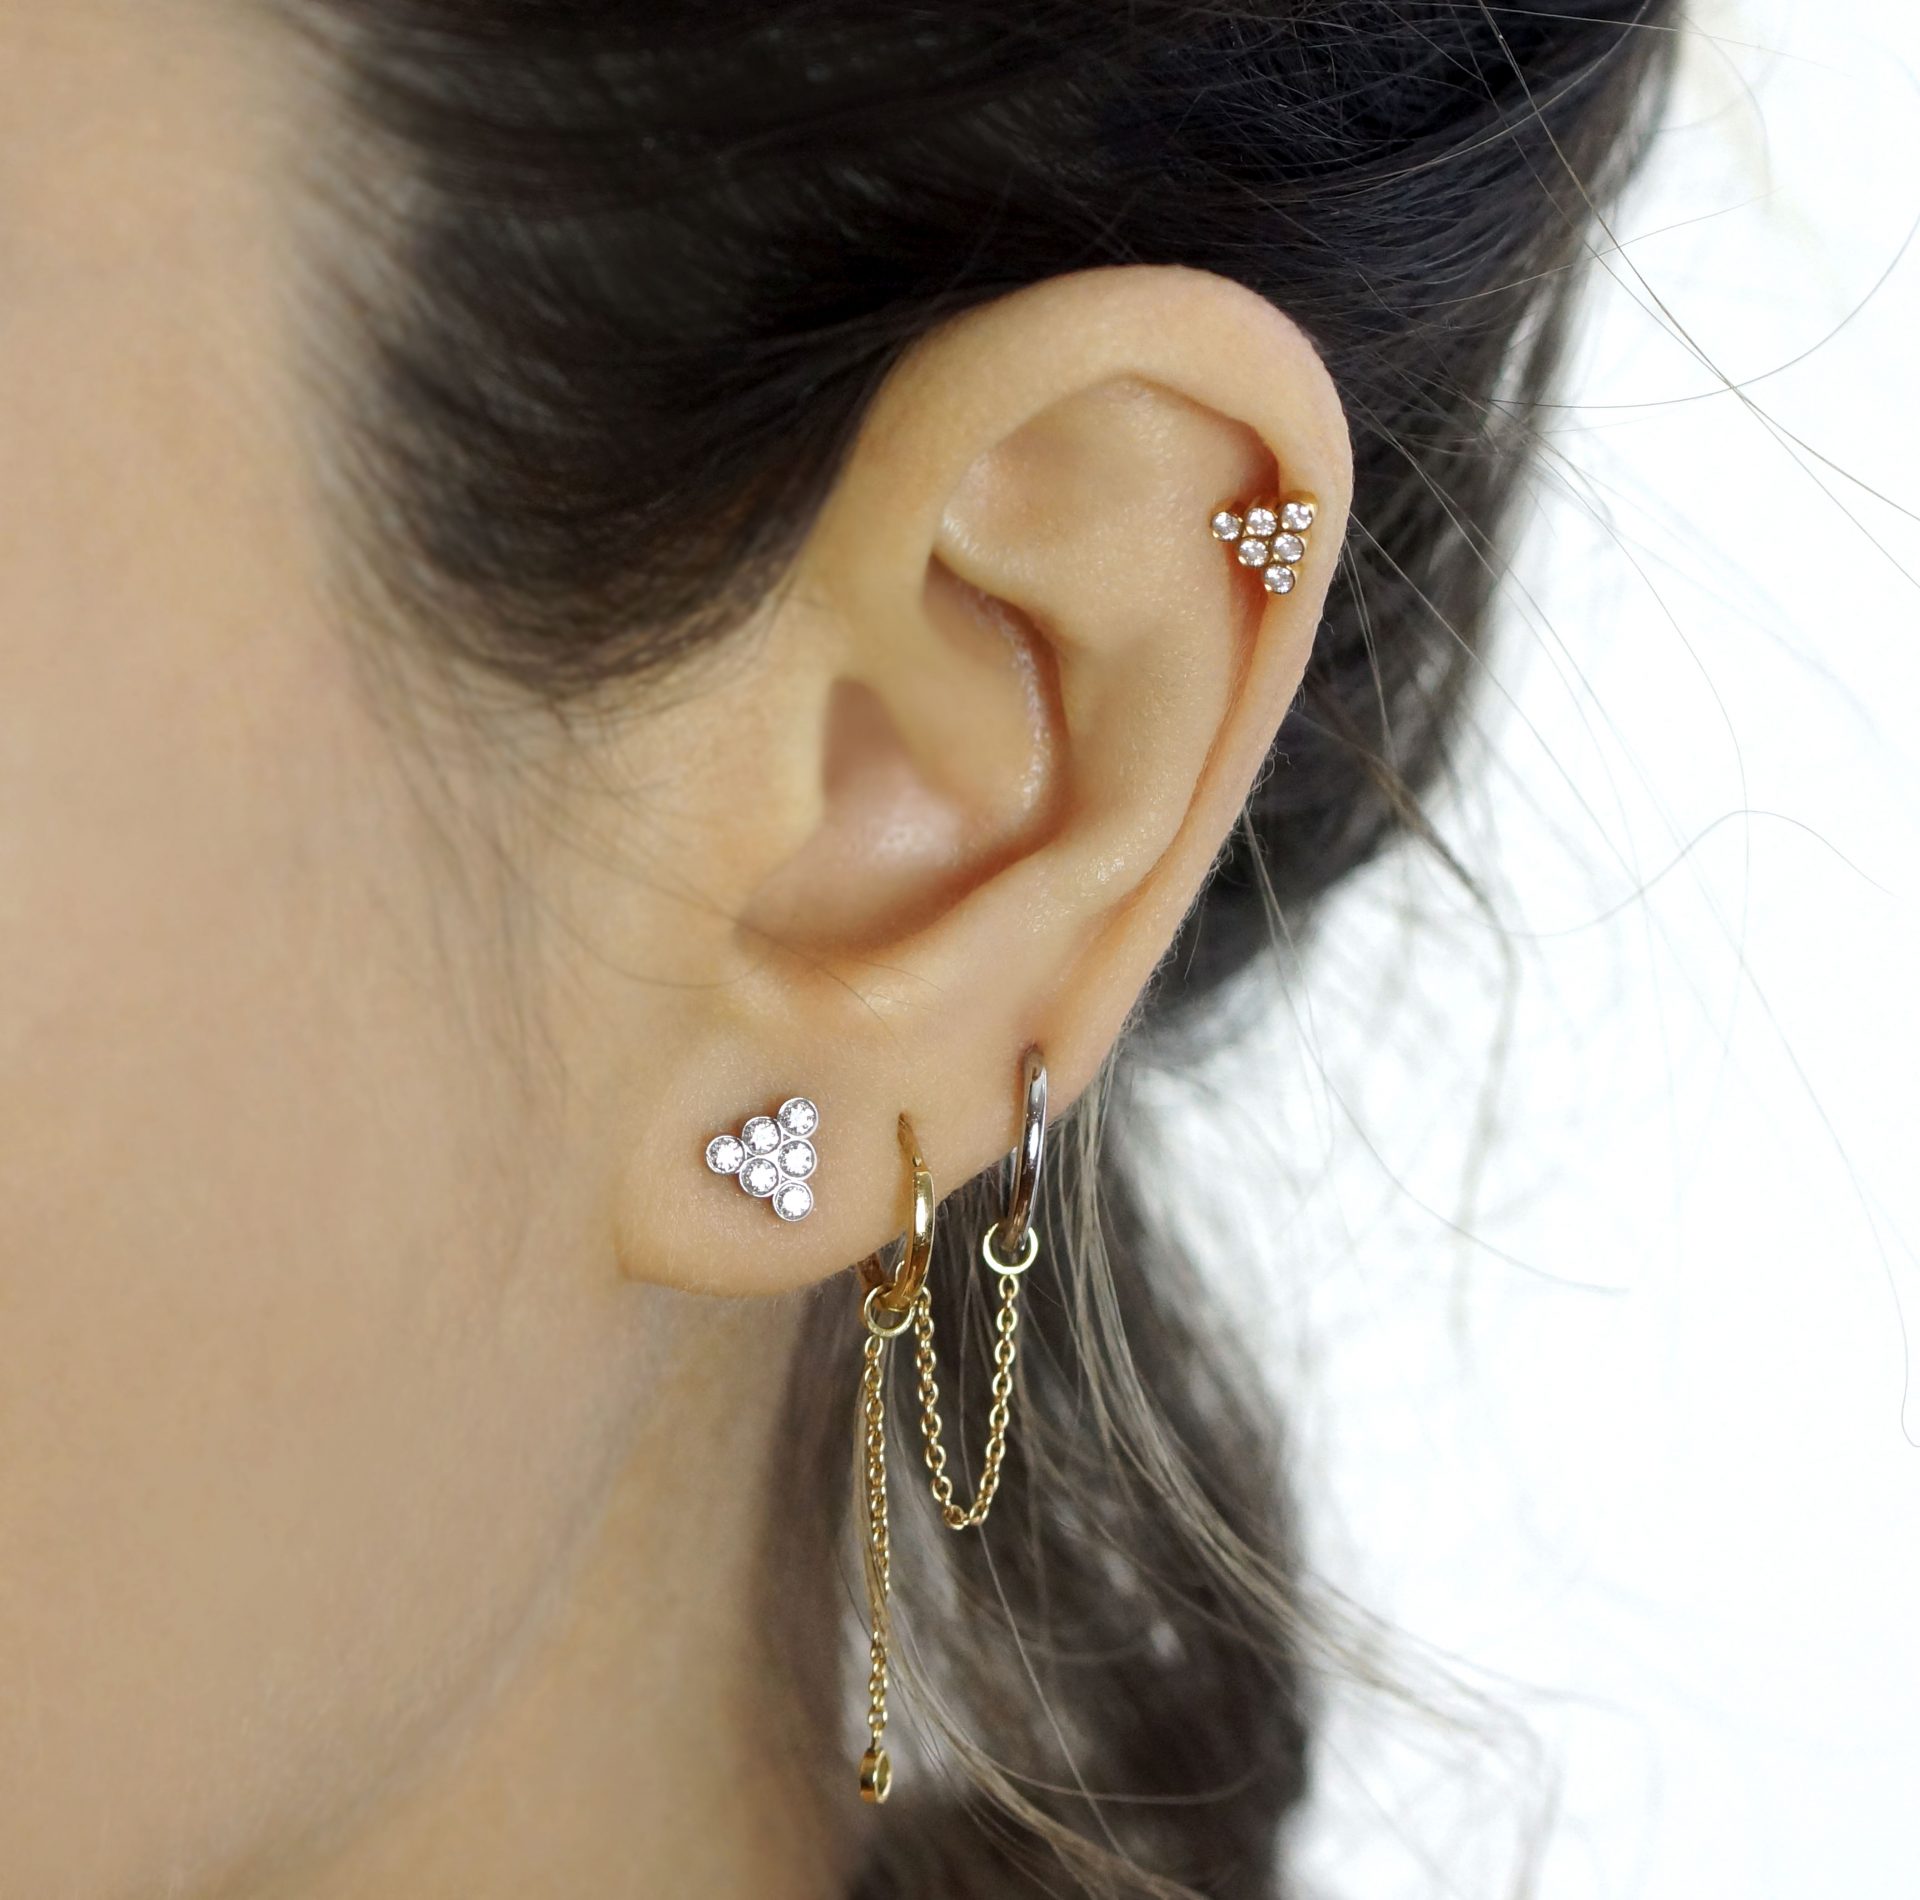 Close-up of dark-haired woman with earring stack in left ear.